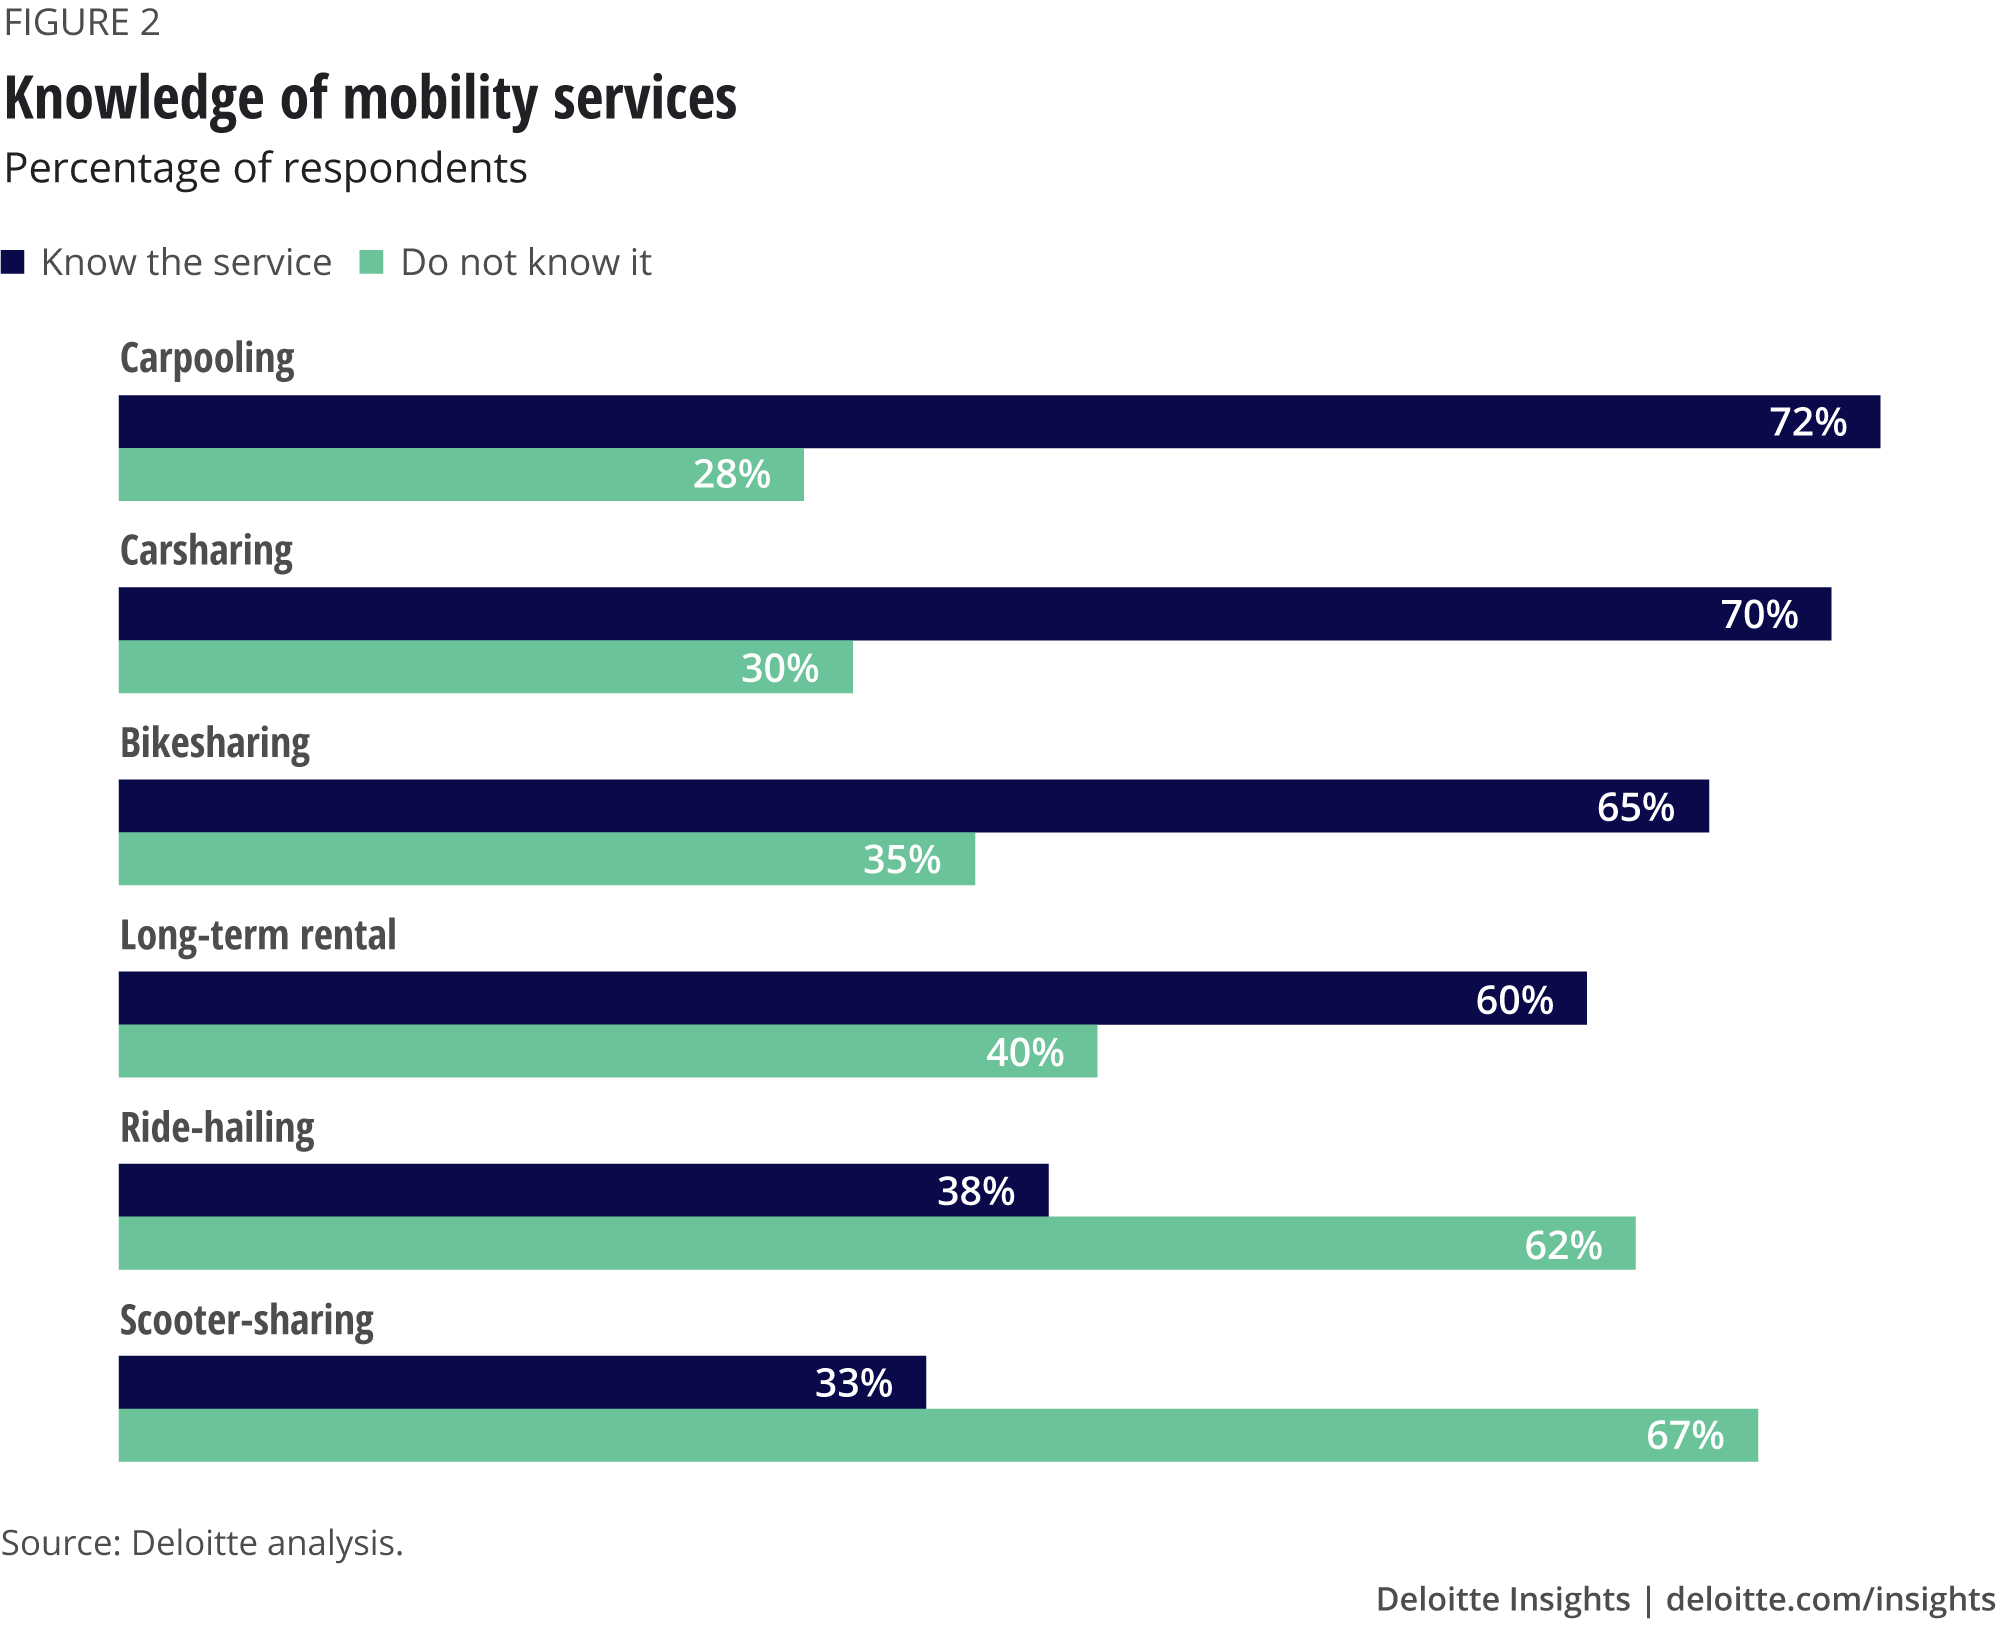 Knowledge of mobility services